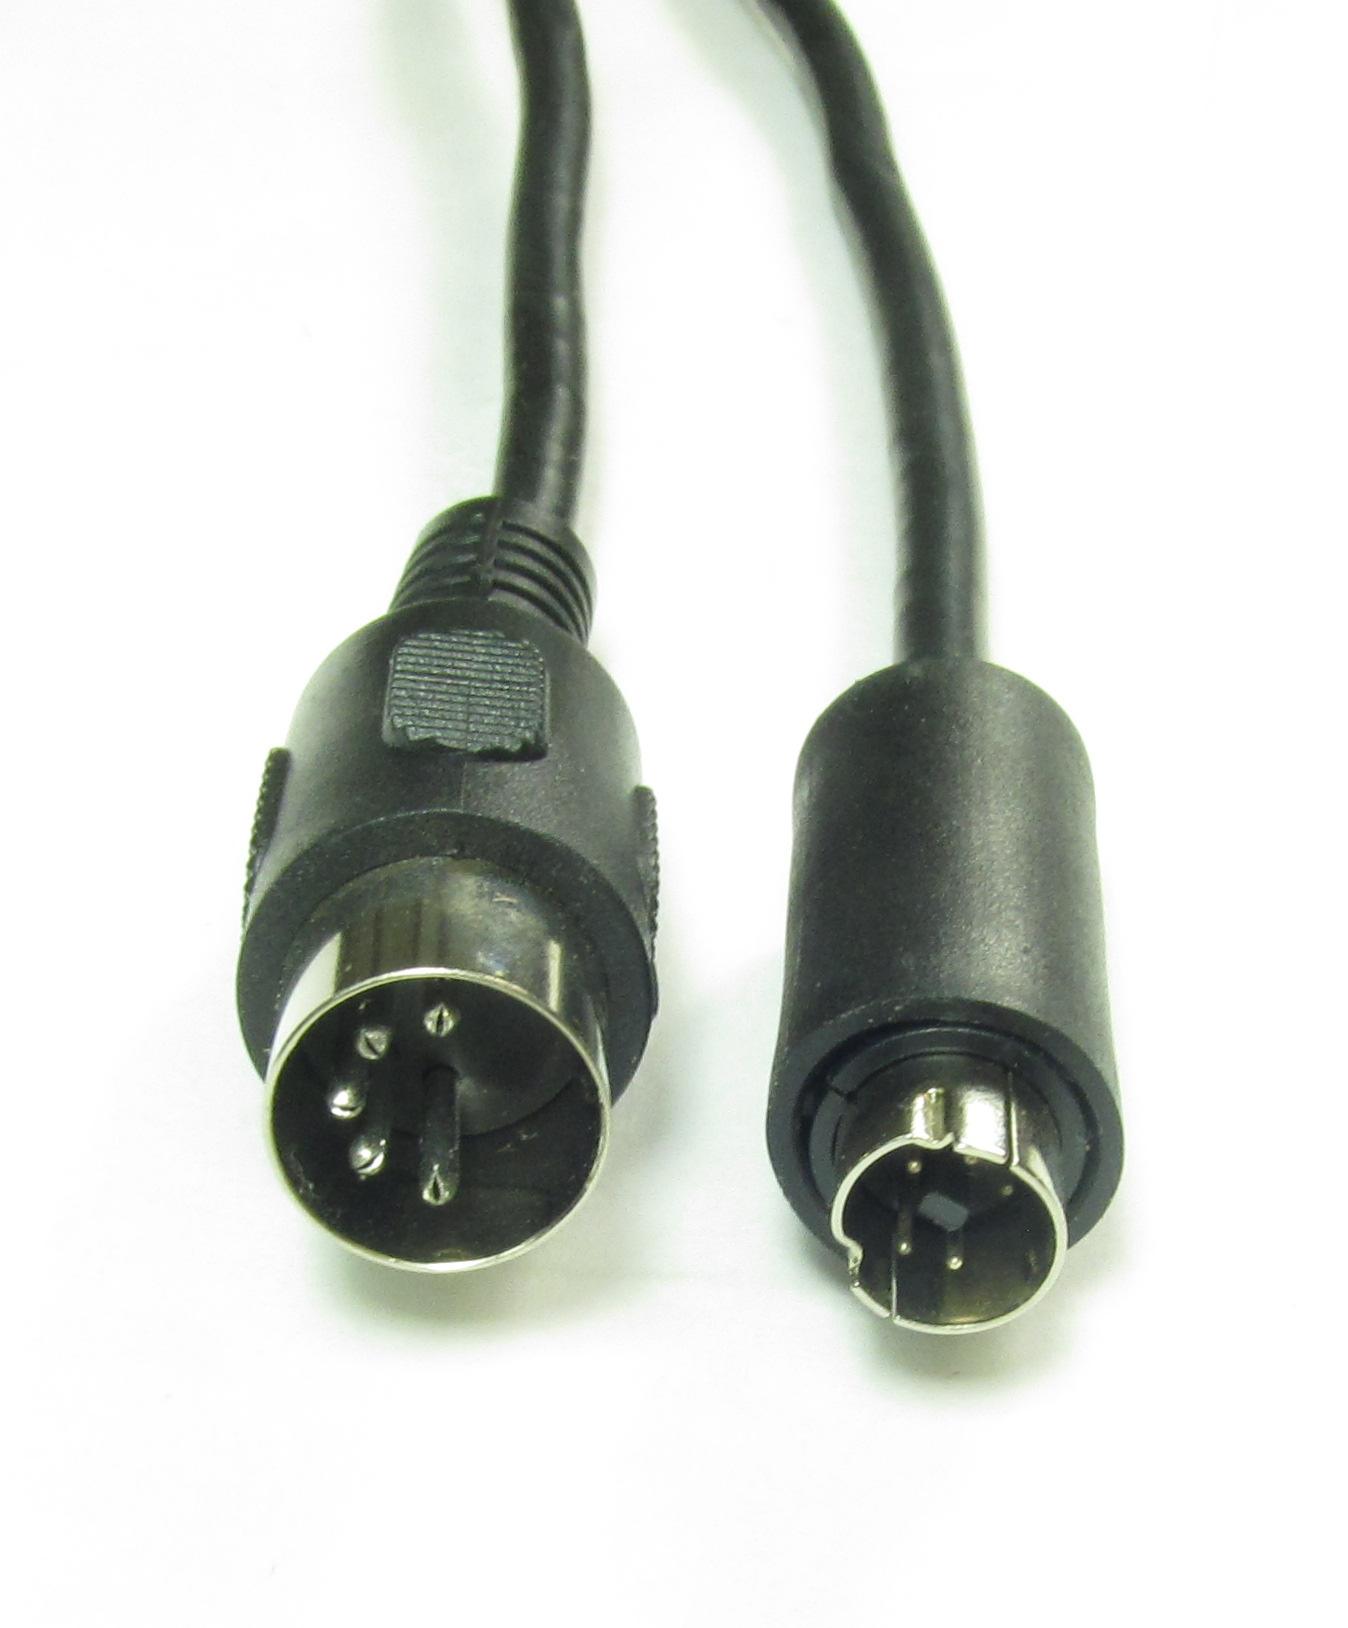 Pnp 5m Plug Play Amplifier Cable For Ft 847